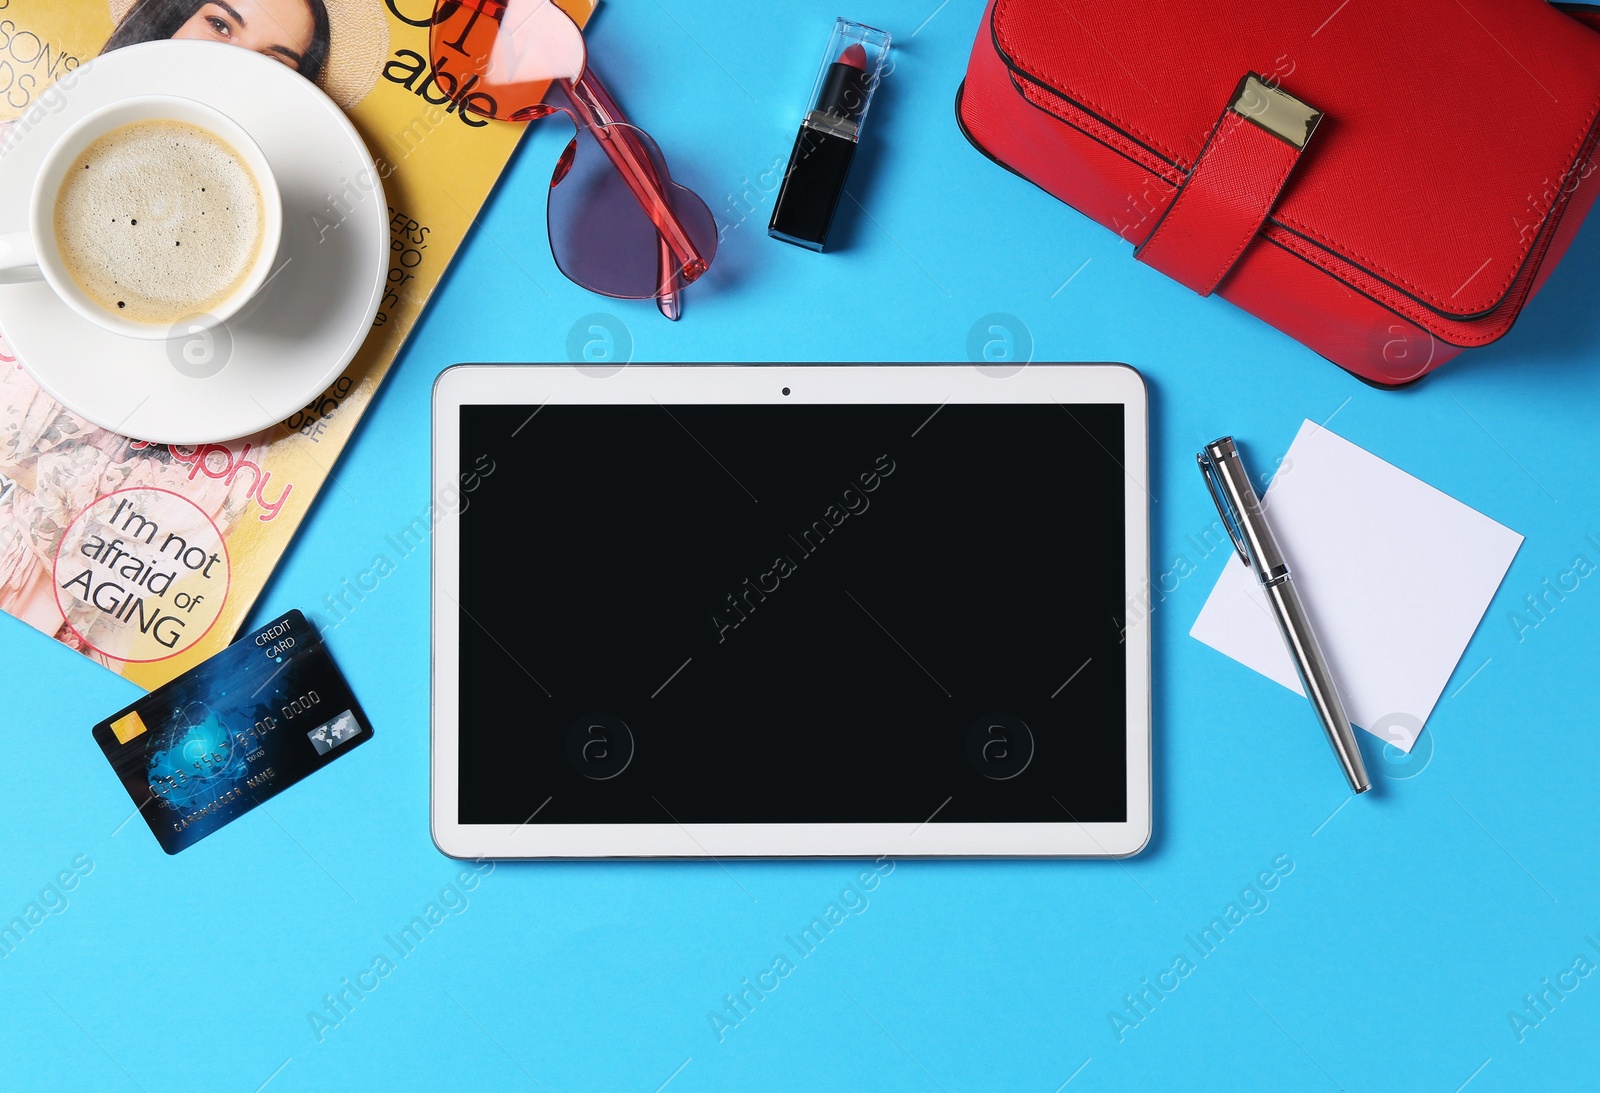 Photo of Online store. Tablet, stationery, credit card, coffee, magazine and accessories on light blue background, flat lay